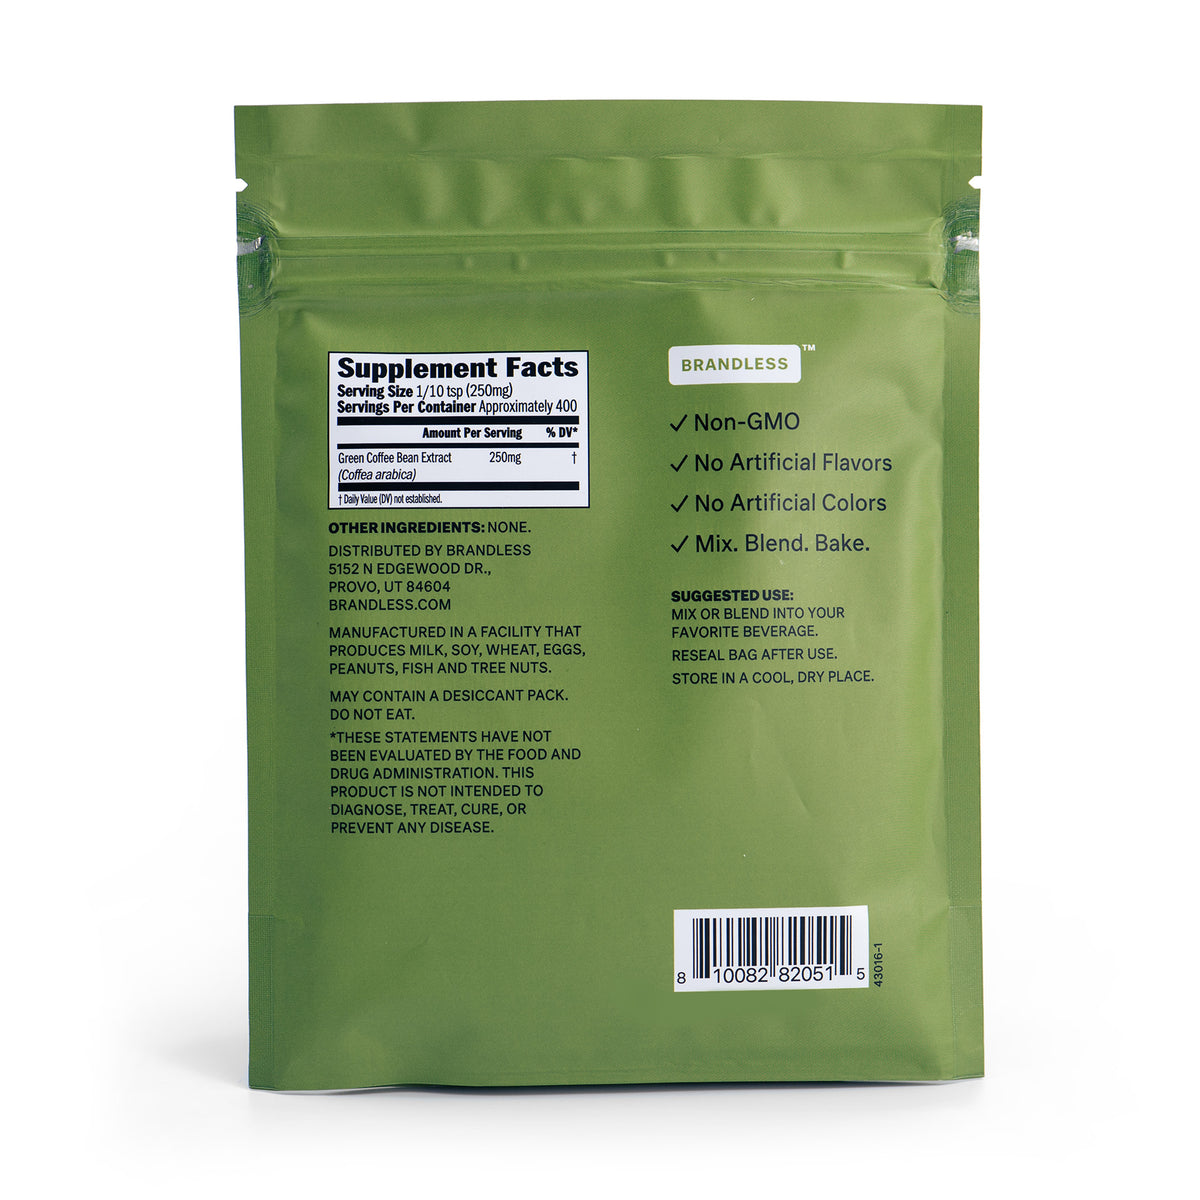 Rear of bag. Supplement Facts: Serving size 1/10 Tsp (250mg). Servings per container: approximately 400.  Green coffee bean extract 250mg.  Other ingredients: none. Non-GMO. No artificial flavors. No artificial colors. Mix, Blend, Bake. Suggested use: mix or blend into your favorite beverage.  Reseal bag after use.